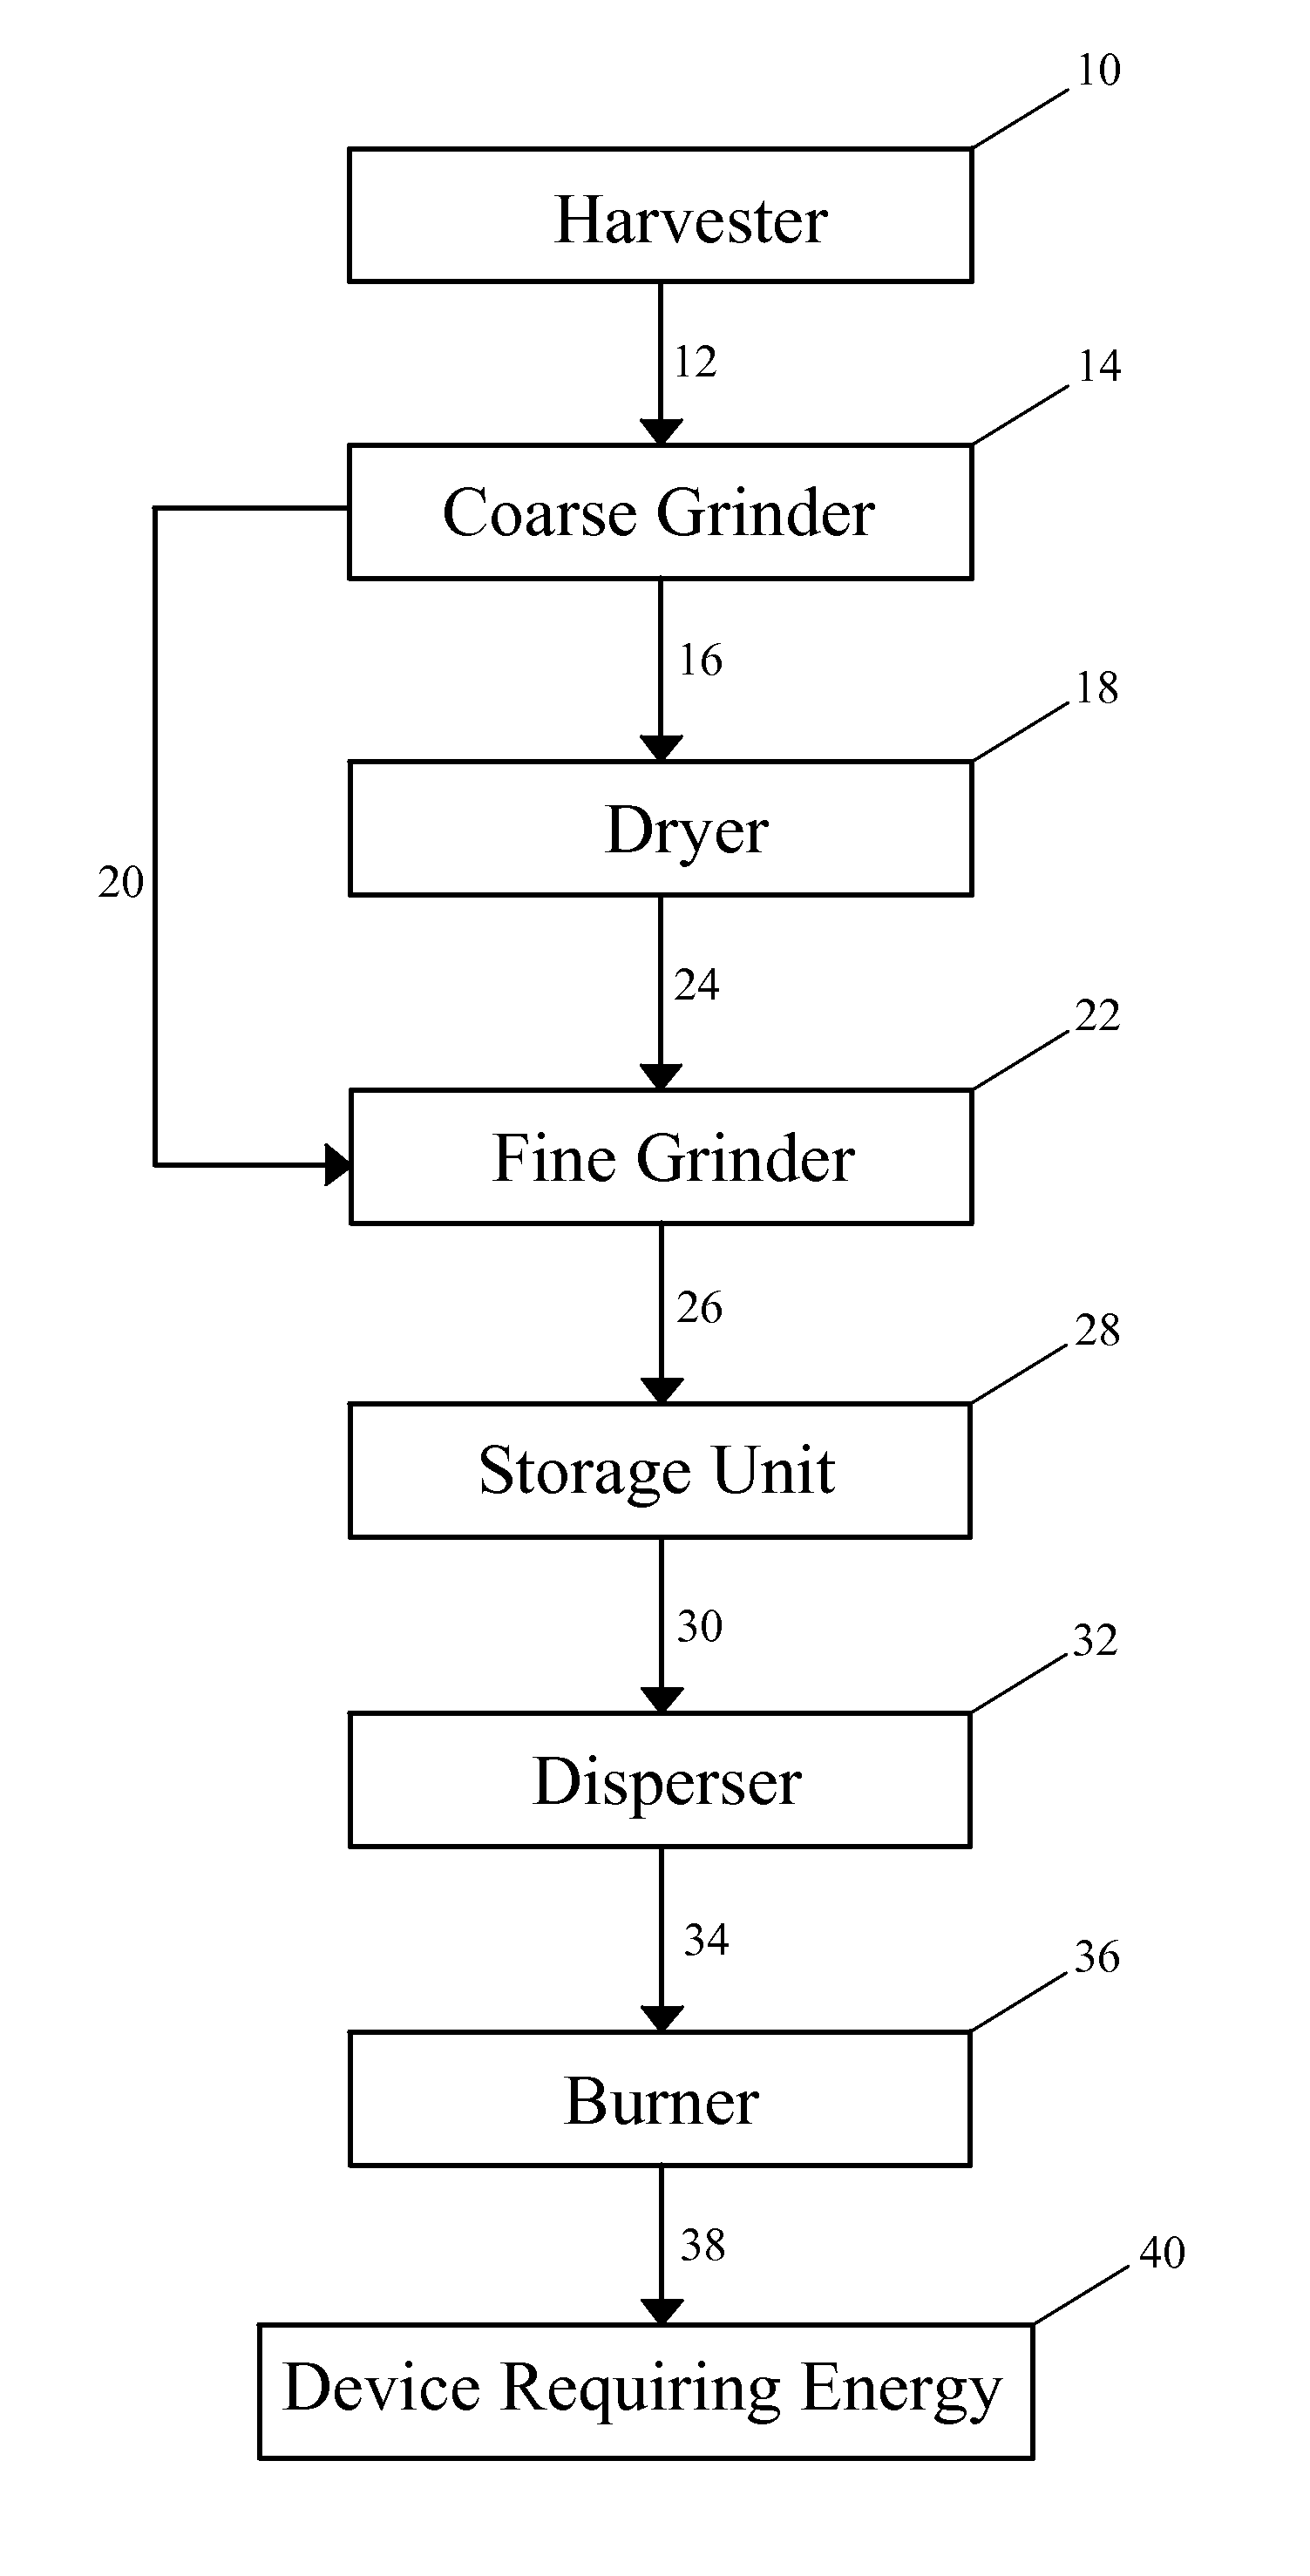 Systems And Methods For Converting Biomass In The Field To A Combustible Fluid For Direct Replacement Or Supplement To Liquid Fossil Fuels